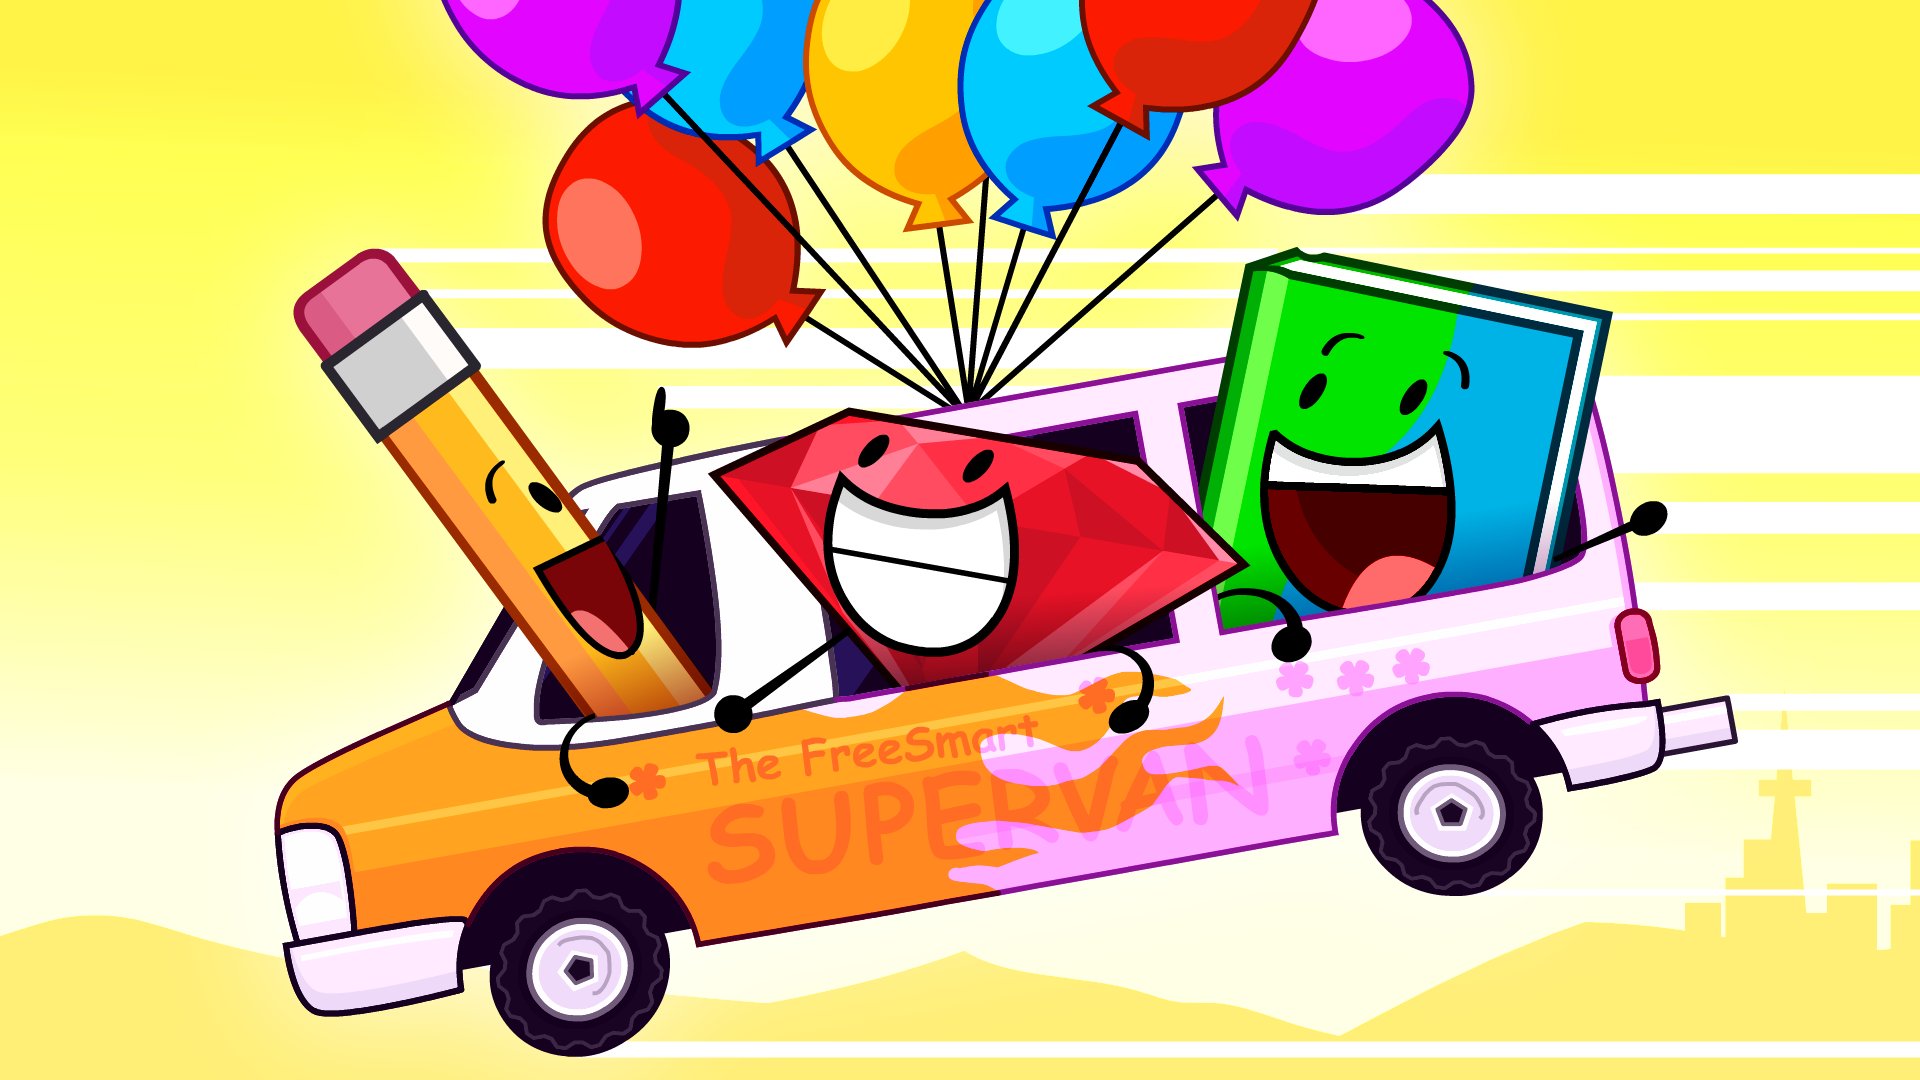 Image 4 Lpng Battle For Dream Island Wiki Fandom Powered - Foujr Bfdi -  Free Transparent PNG Clipart Images Download